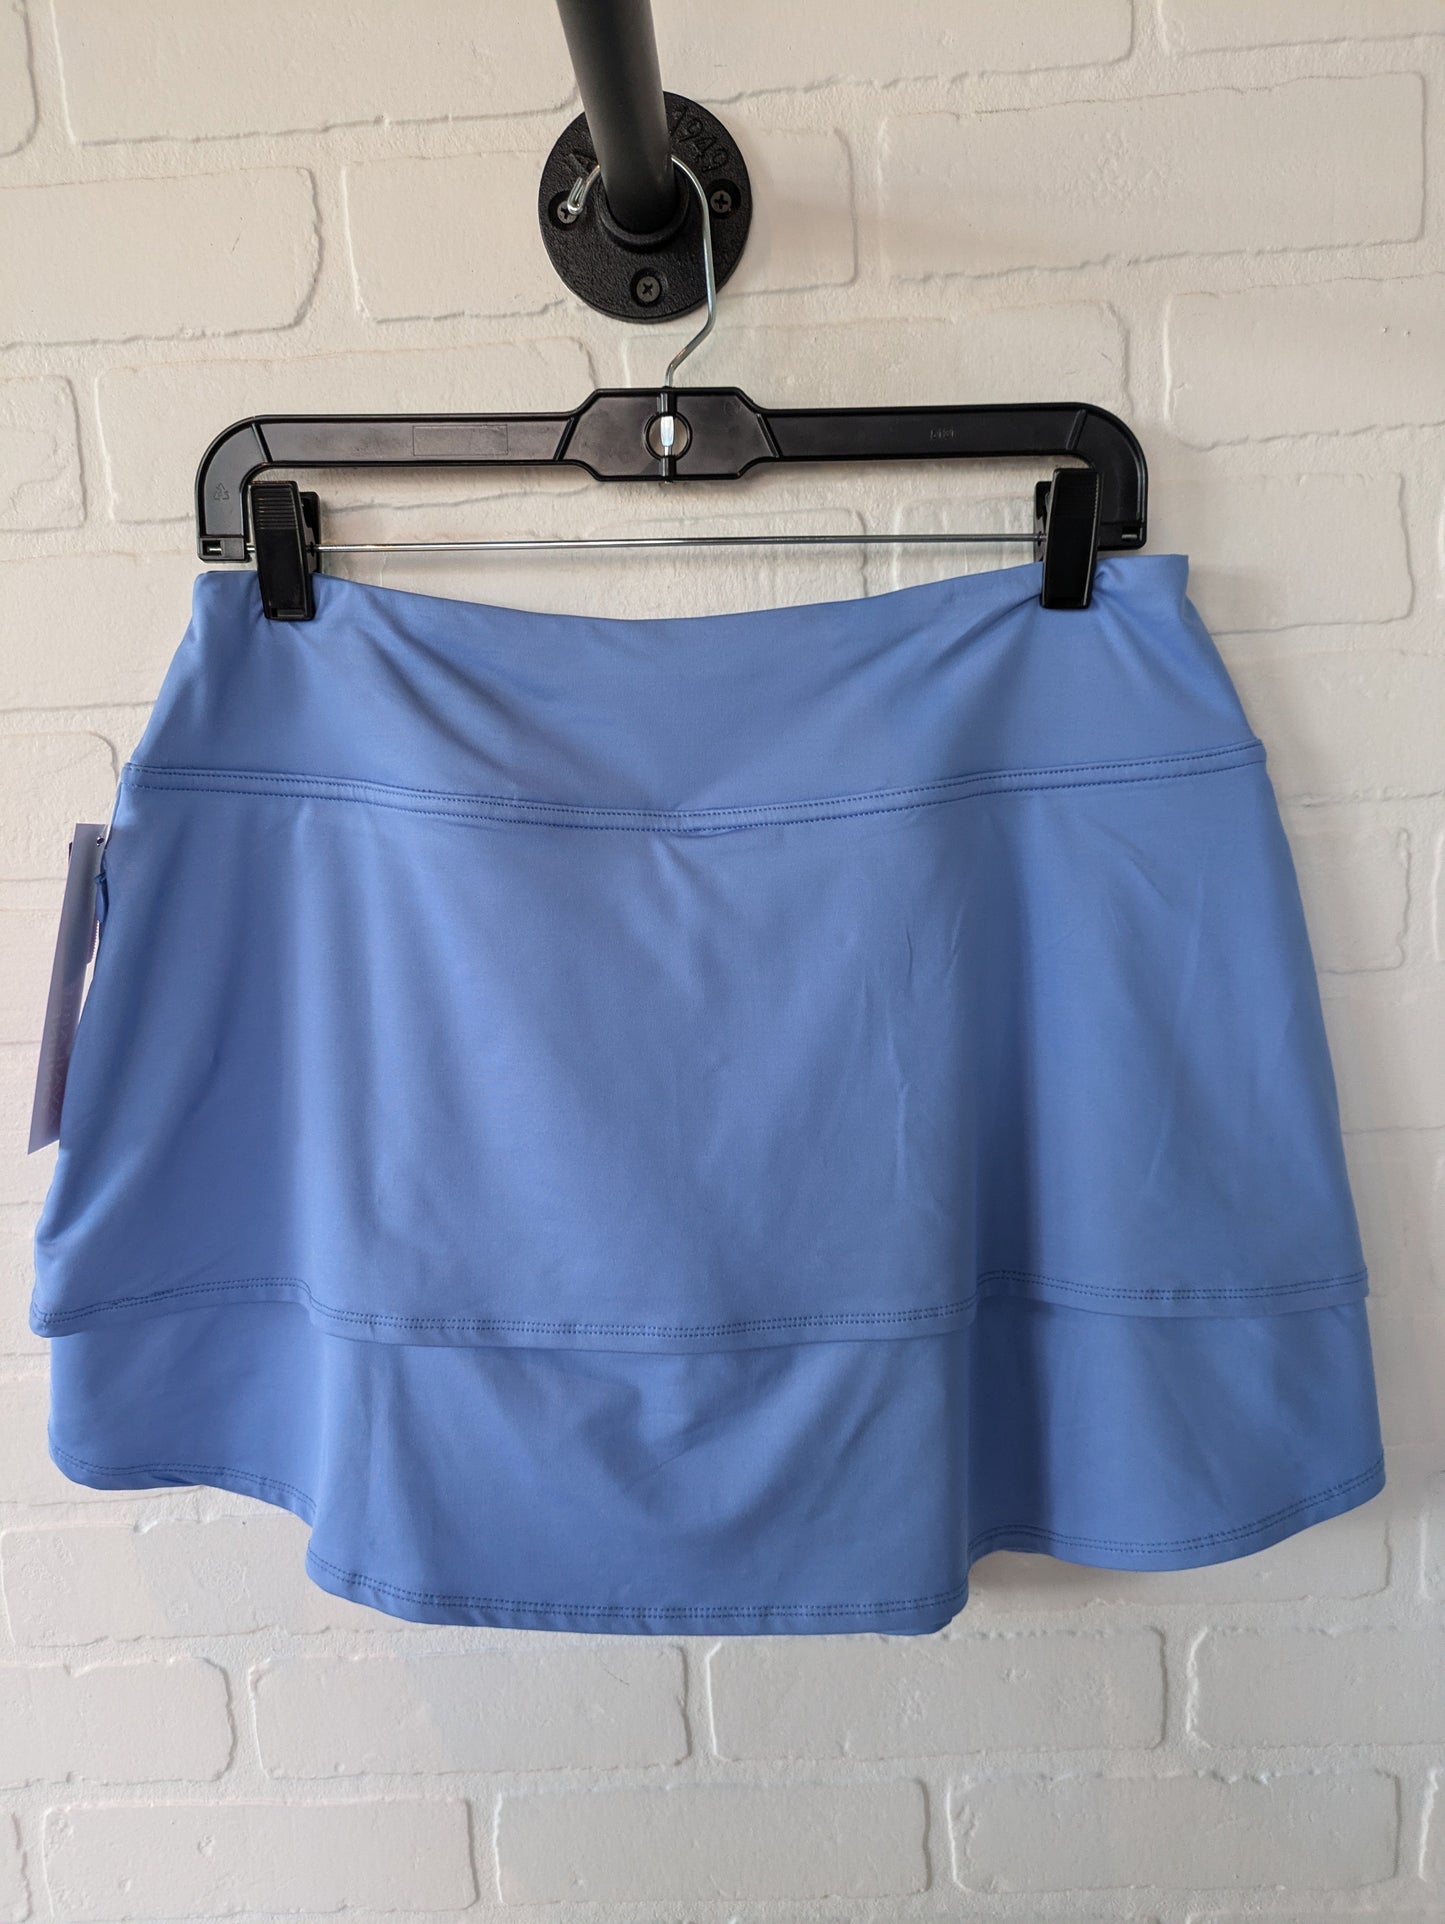 Blue Athletic Skirt Clothes Mentor, Size 8